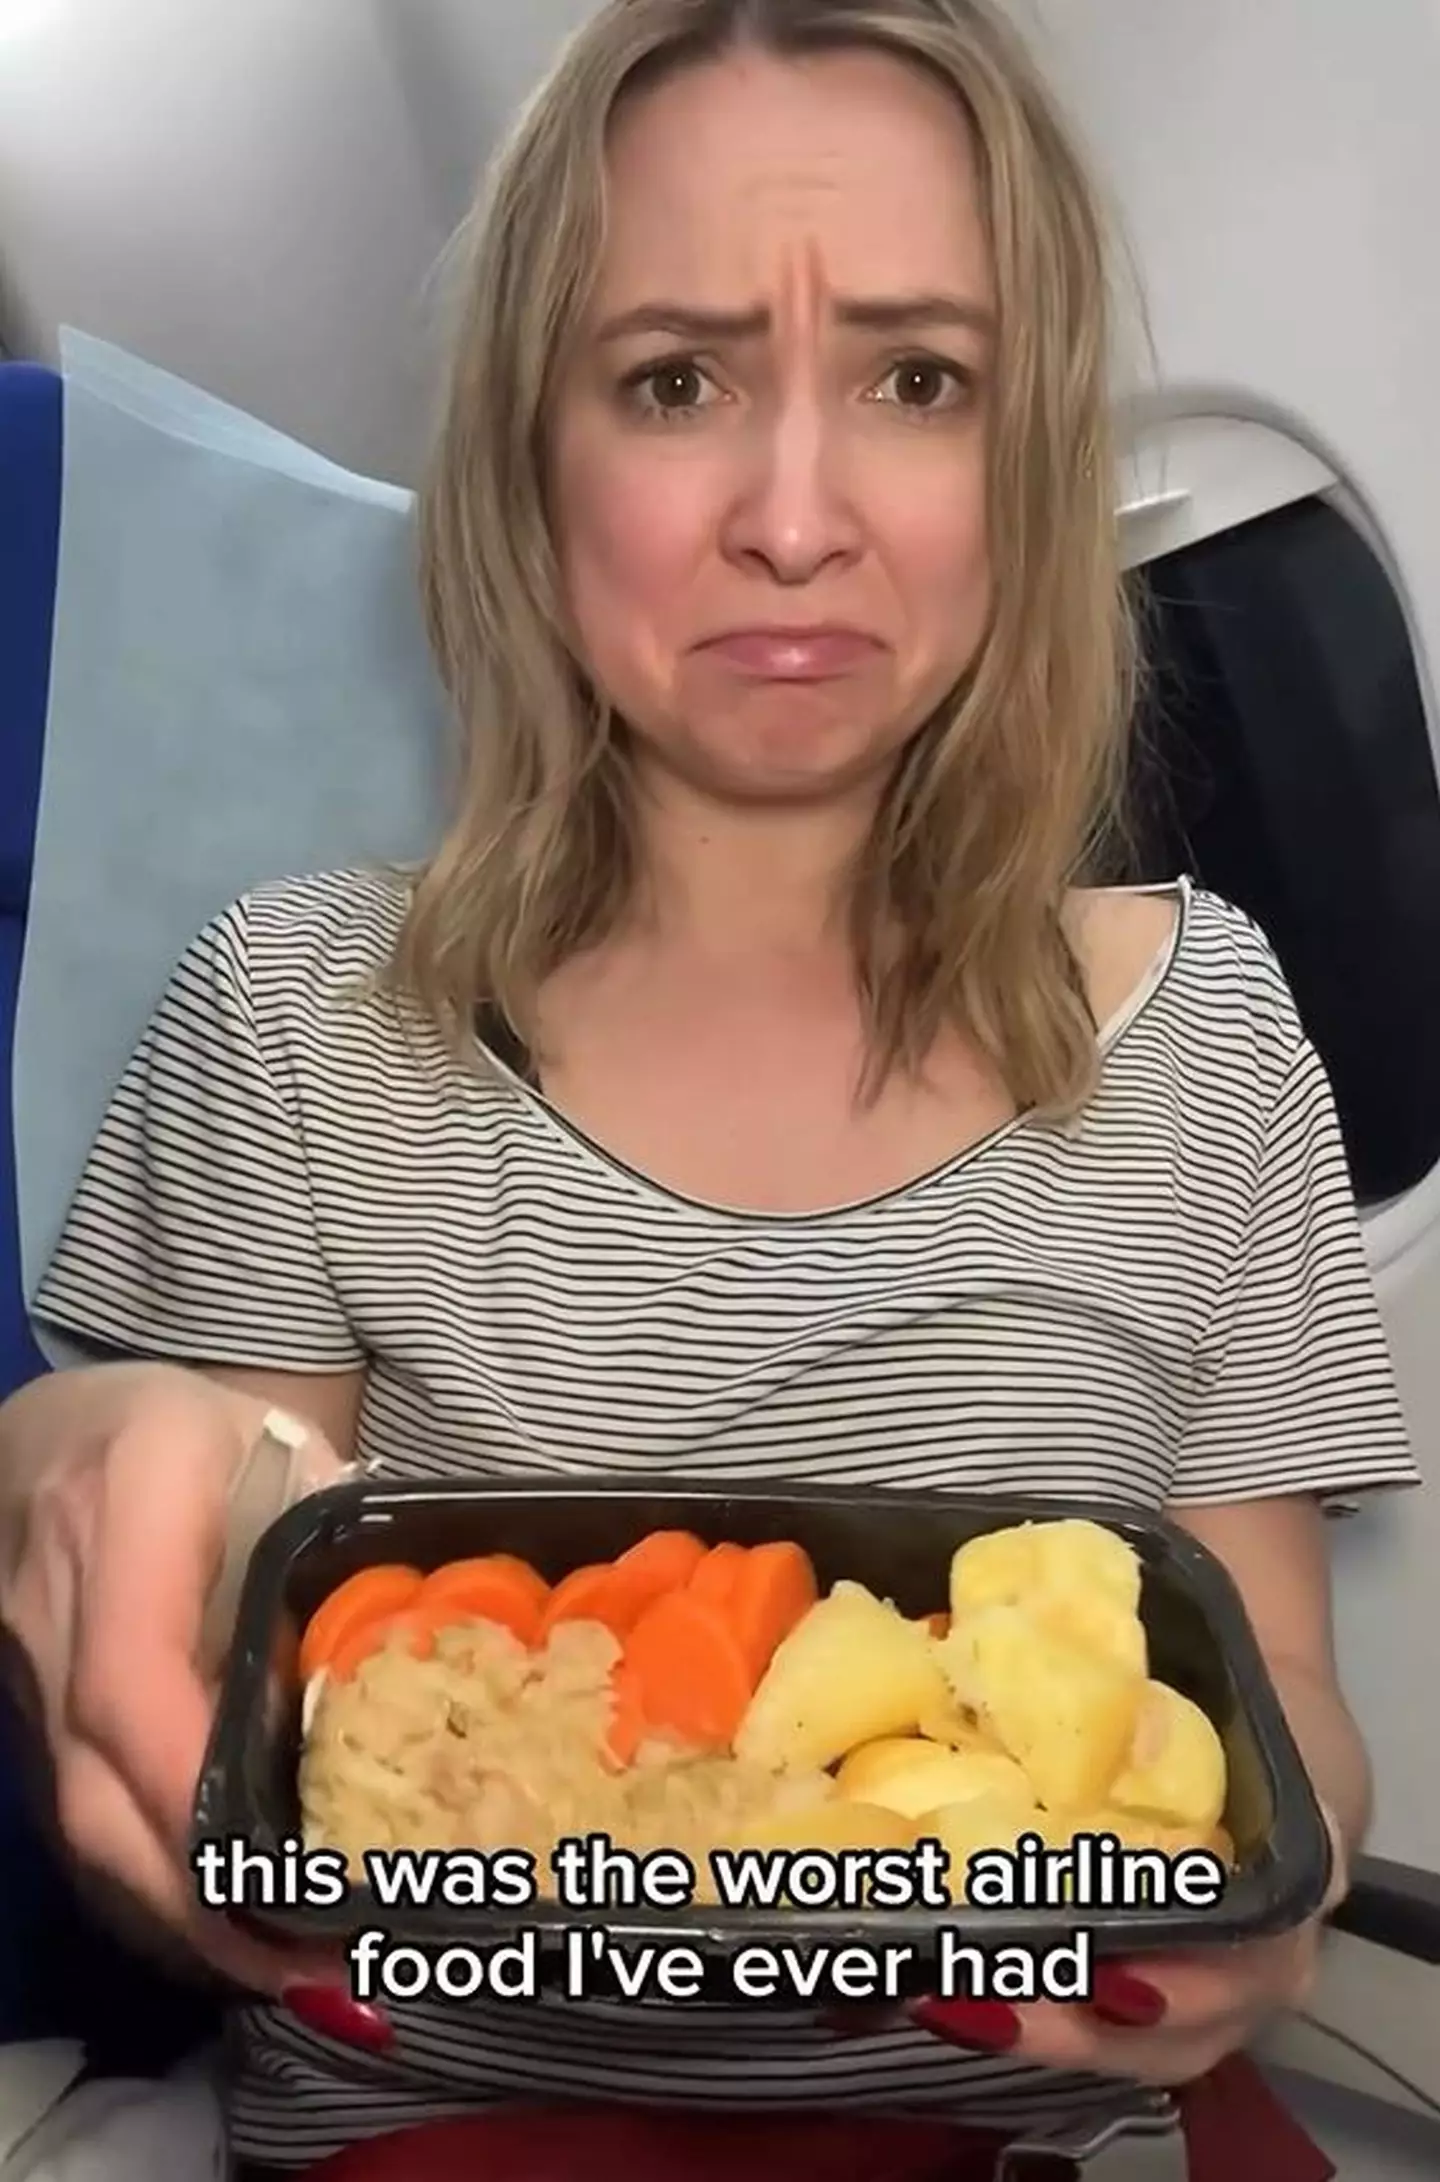 Travel blogger, Nicola Easterby, was left stunned by the 'barely edible' meals during her long-haul flight.